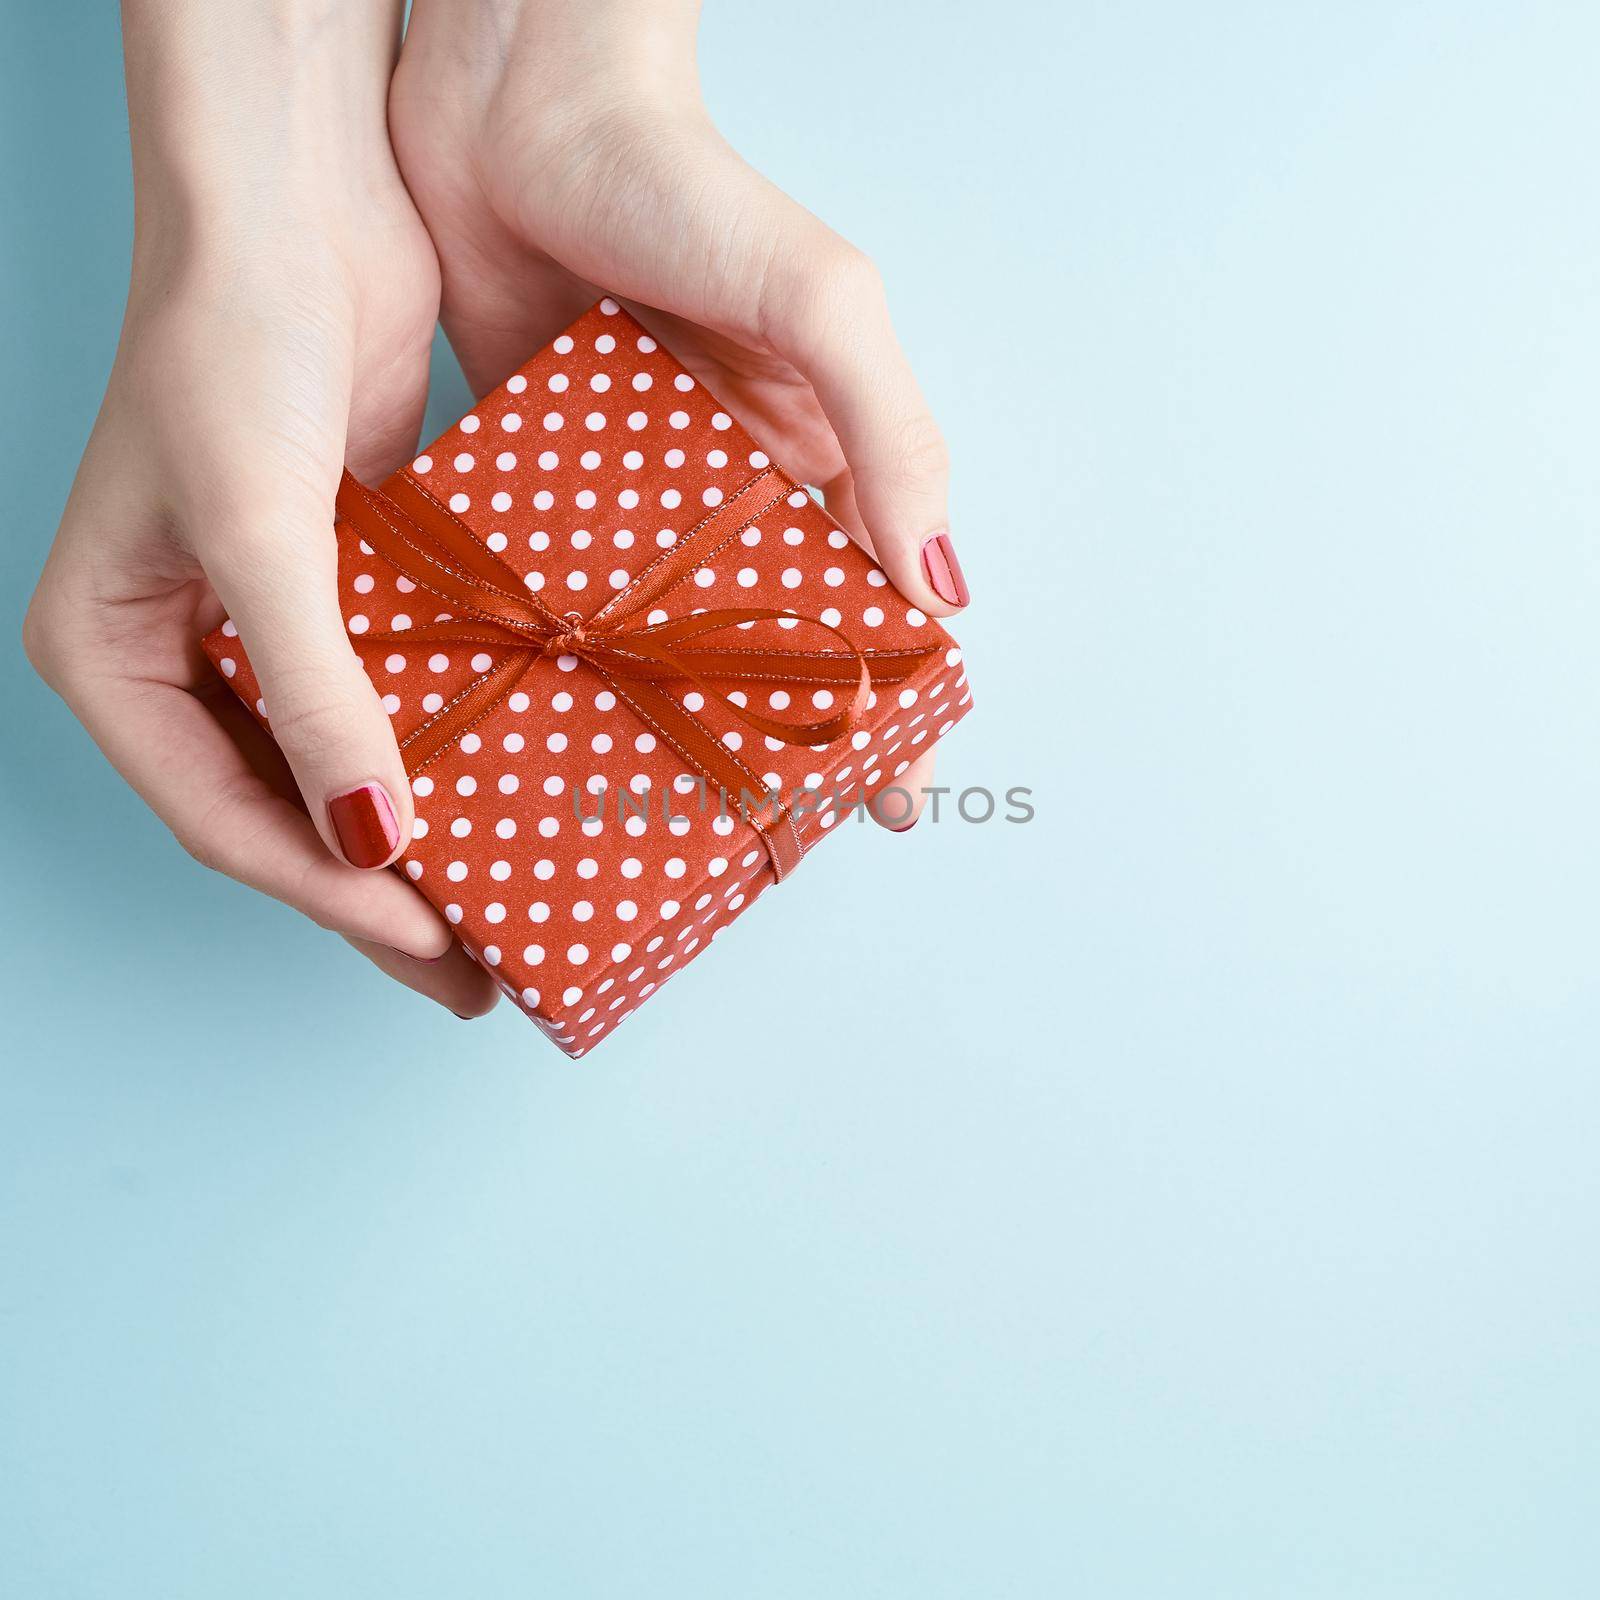 beautiful woman hands holding a red present with ribbon, hands with red nail polish gloss shine, concept on white background copy space